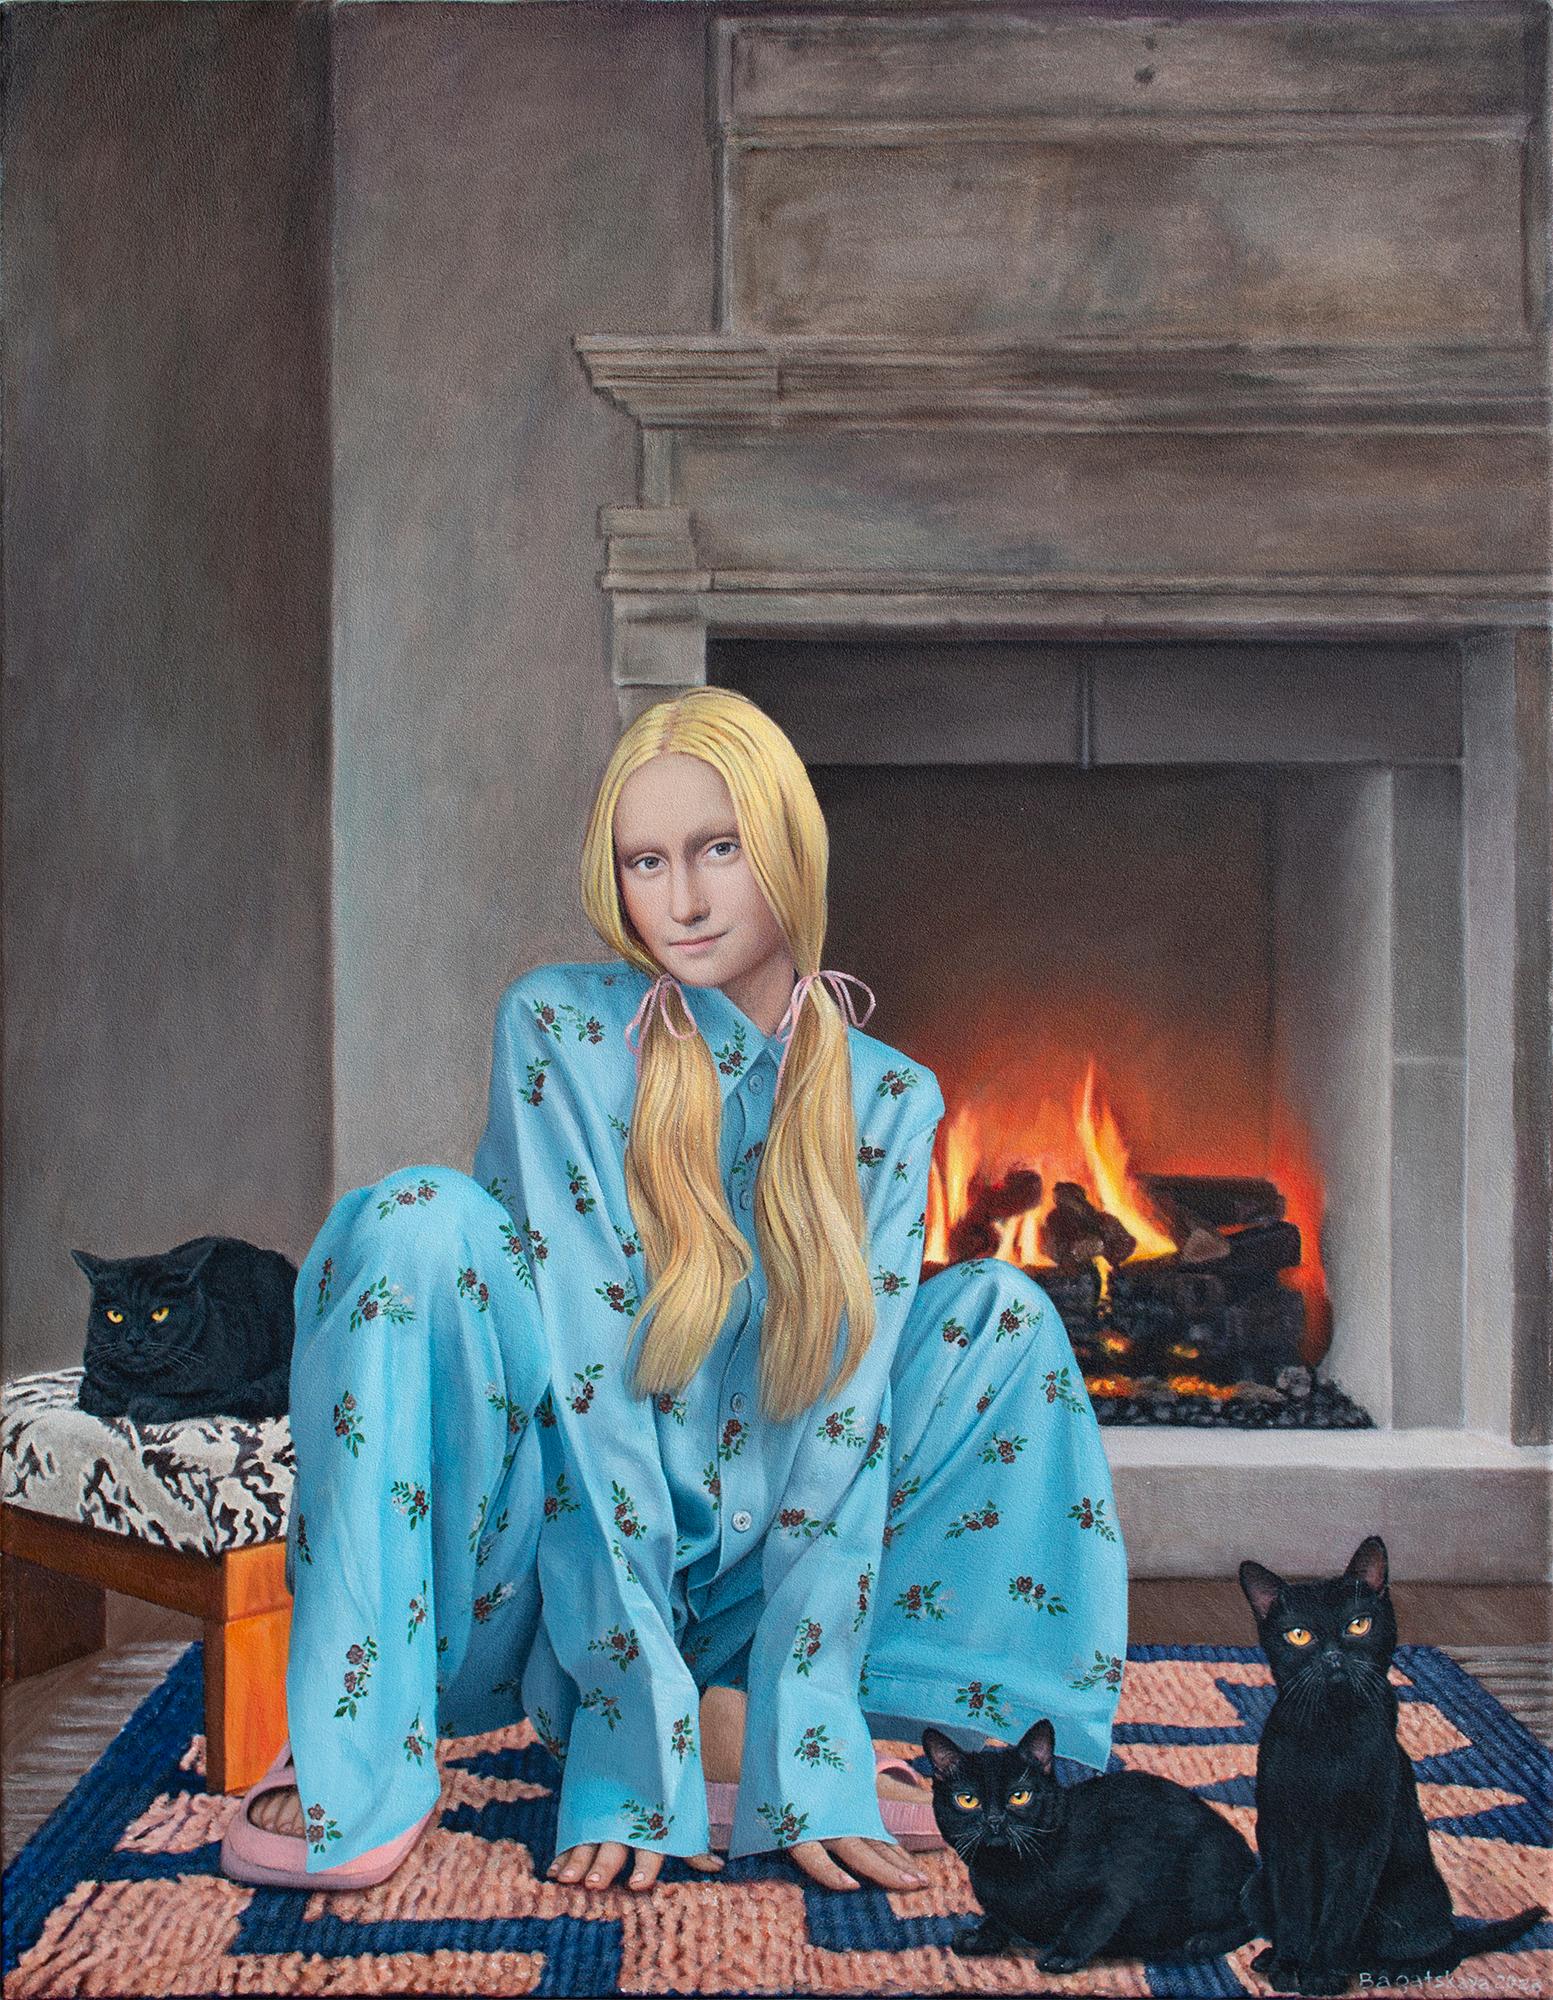 Contemporary portrait "By the Fireplace"